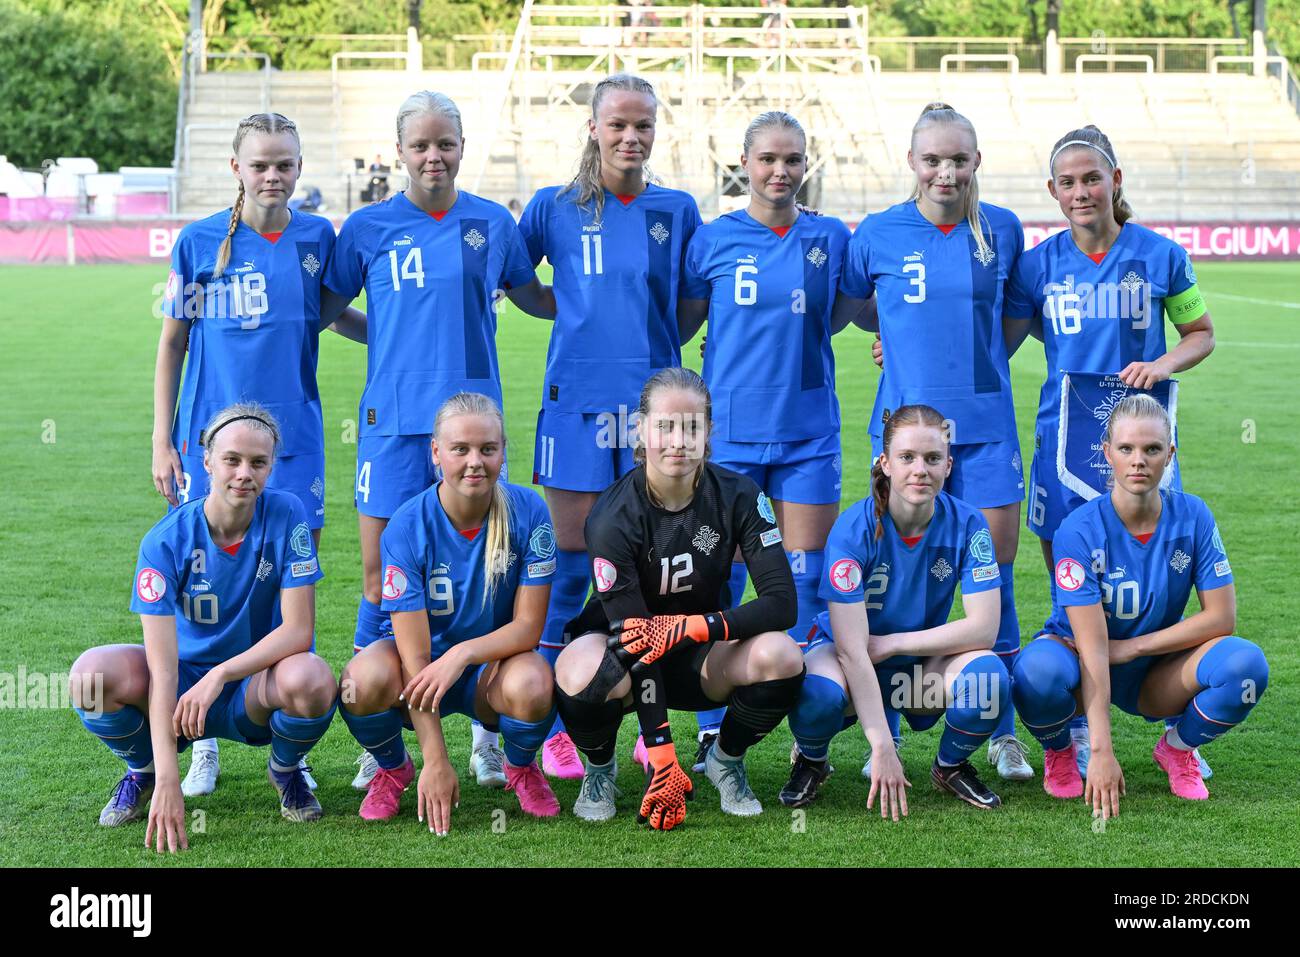 players of Iceland with Irena Hedinsdottir Gonzalez (18) of Iceland, Isfold Mary Sigtryggsdottir (14) of Iceland, Snaedis Maria Jorundsdottir (11) of Iceland, Mikaela Petursdottir (6) of Iceland, Jakobina Hjorvarsdottir (3) of Iceland, Saedis Run Heidarsdottir (16) of Iceland, Katla Tryggvadottir (10) of Iceland, Emelia Oskarsdottir (9) of Iceland, goalkeeper Fanney Inga Birkisdottir (12) of Iceland, Birna Kristin Bjornsdottir (2) of Iceland and Vigdis Lilja Kristjansdottir (20) of Iceland pose for a team photo ahead of a female soccer game between the national women under 19 teams of Iceland Stock Photo